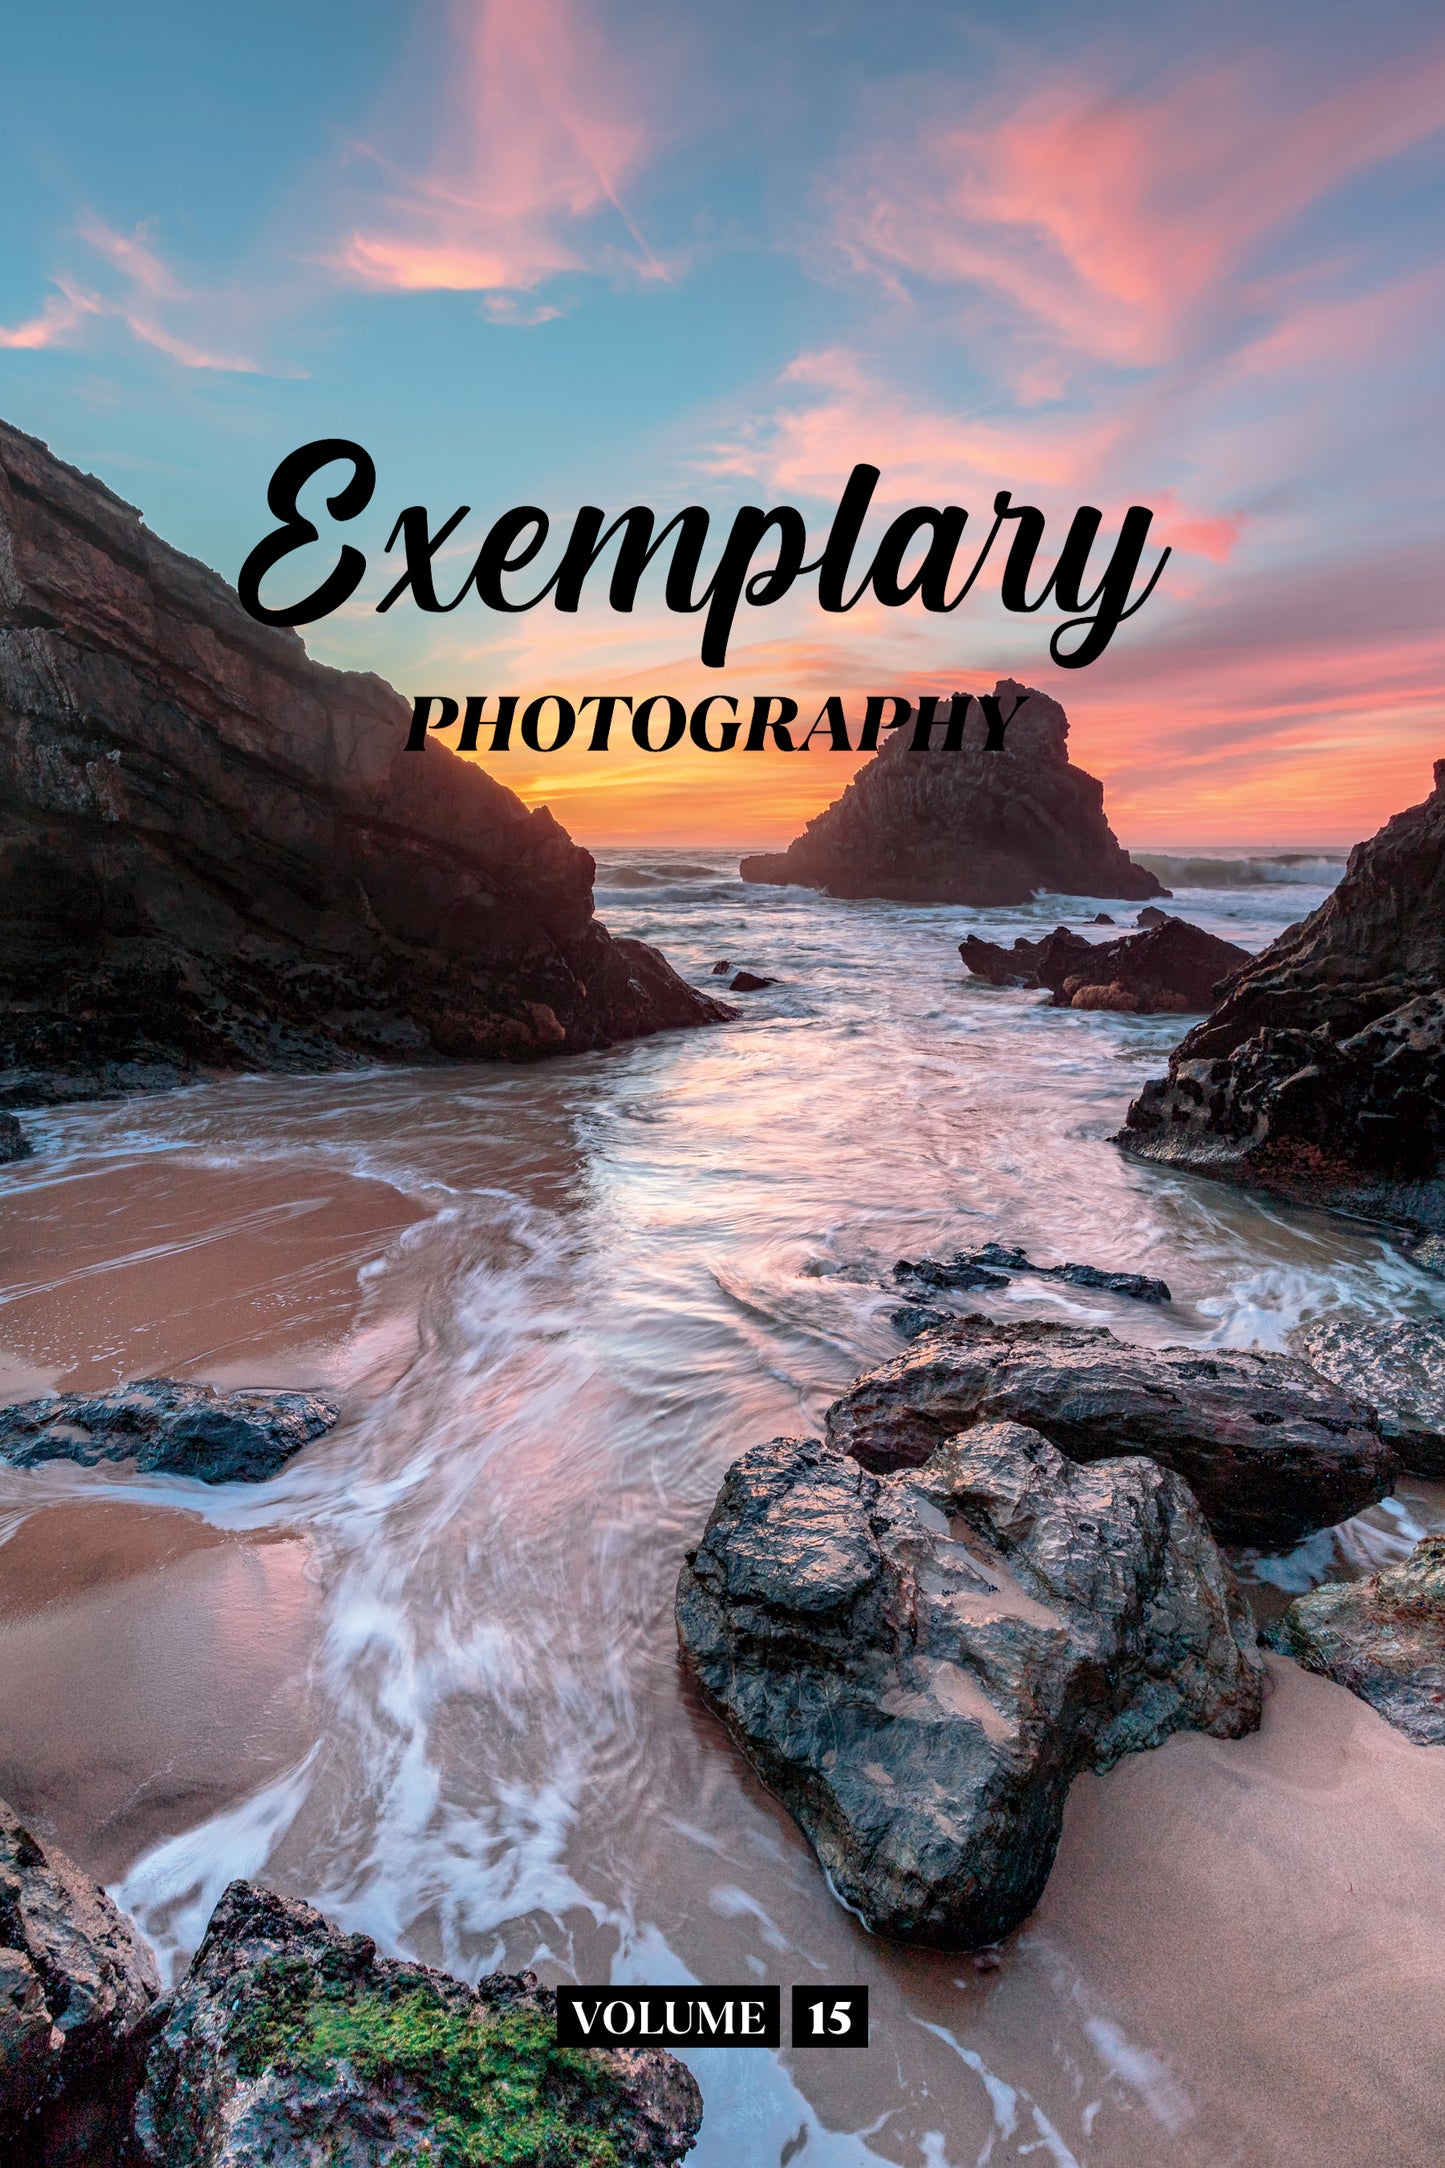 Exemplary Photography Volume 15 (Physical Book)